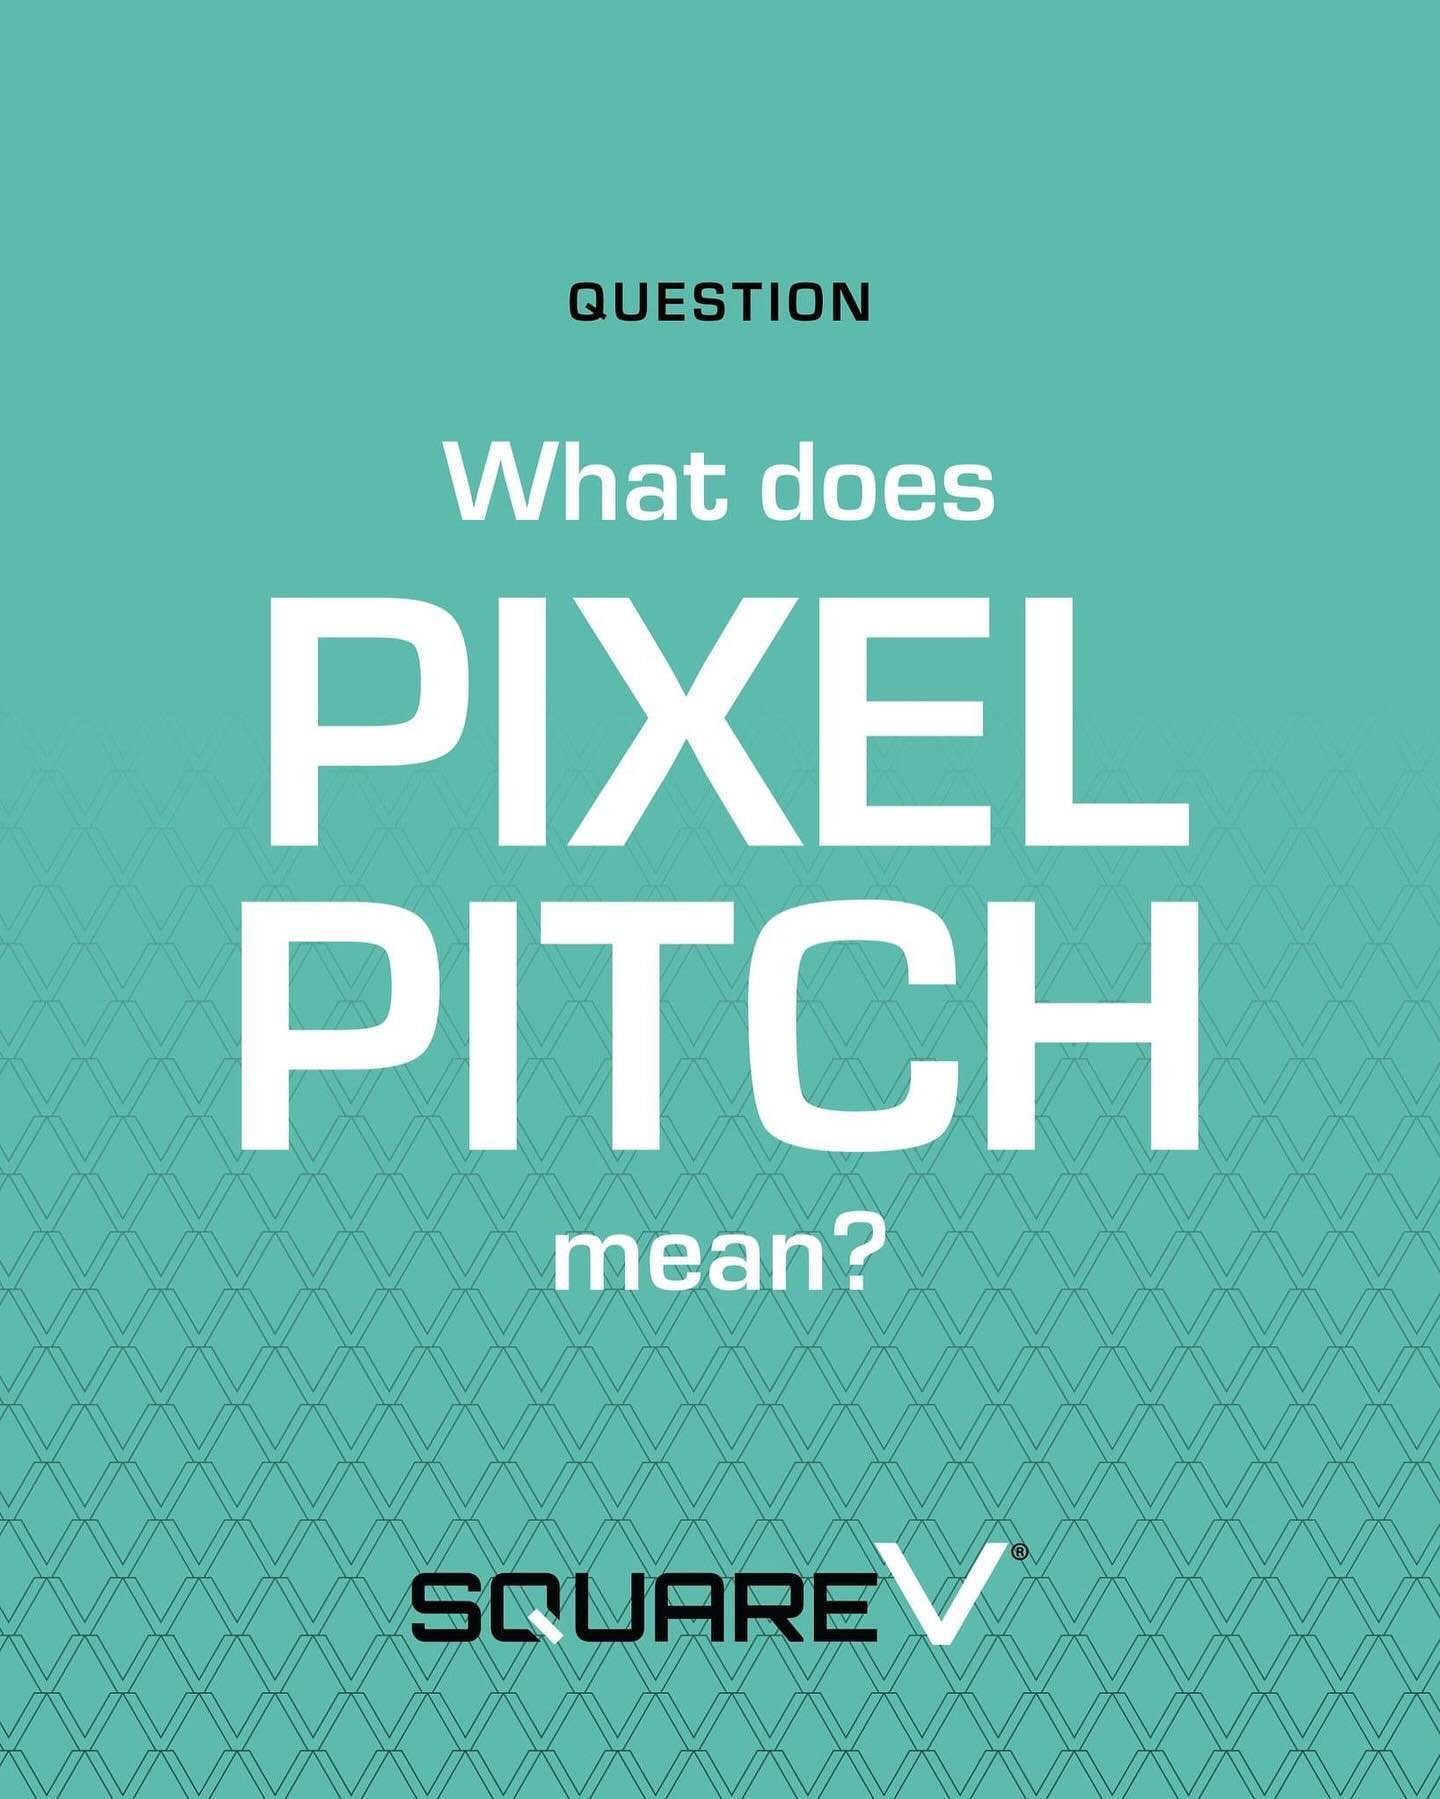 &ldquo;Pixel pitch&rdquo; simply refers to the distance between the center of one pixel (LED bulb) to the center of a neighboring pixel. The lower the pixel pitch, the more pixels there are on a given product.

🔎 From close up, a lower pixel pitch c